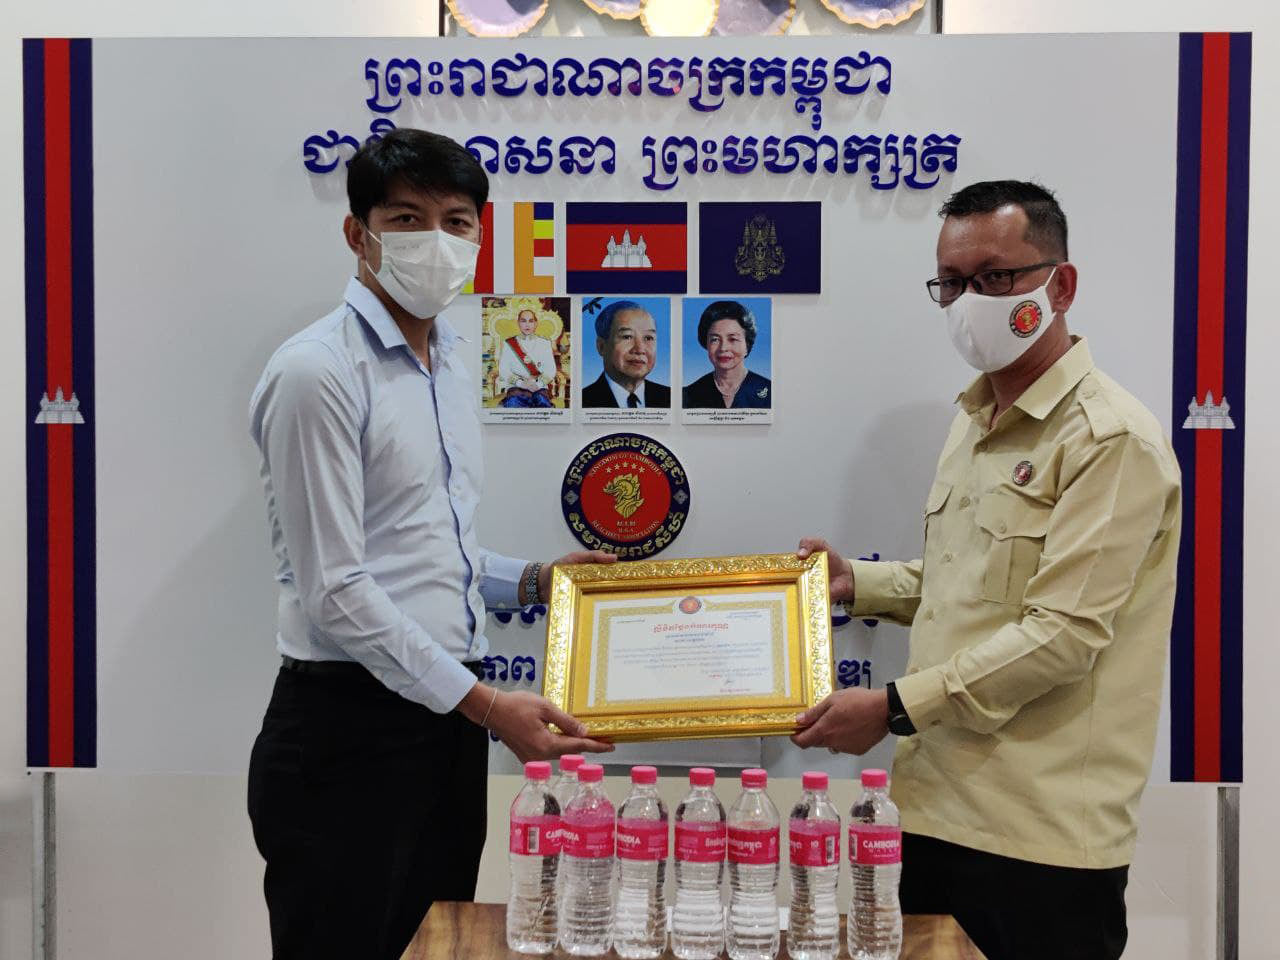 Mitsu (Cambodia) Co., Ltd. donated sportswear to ReachSey Association in Kep province